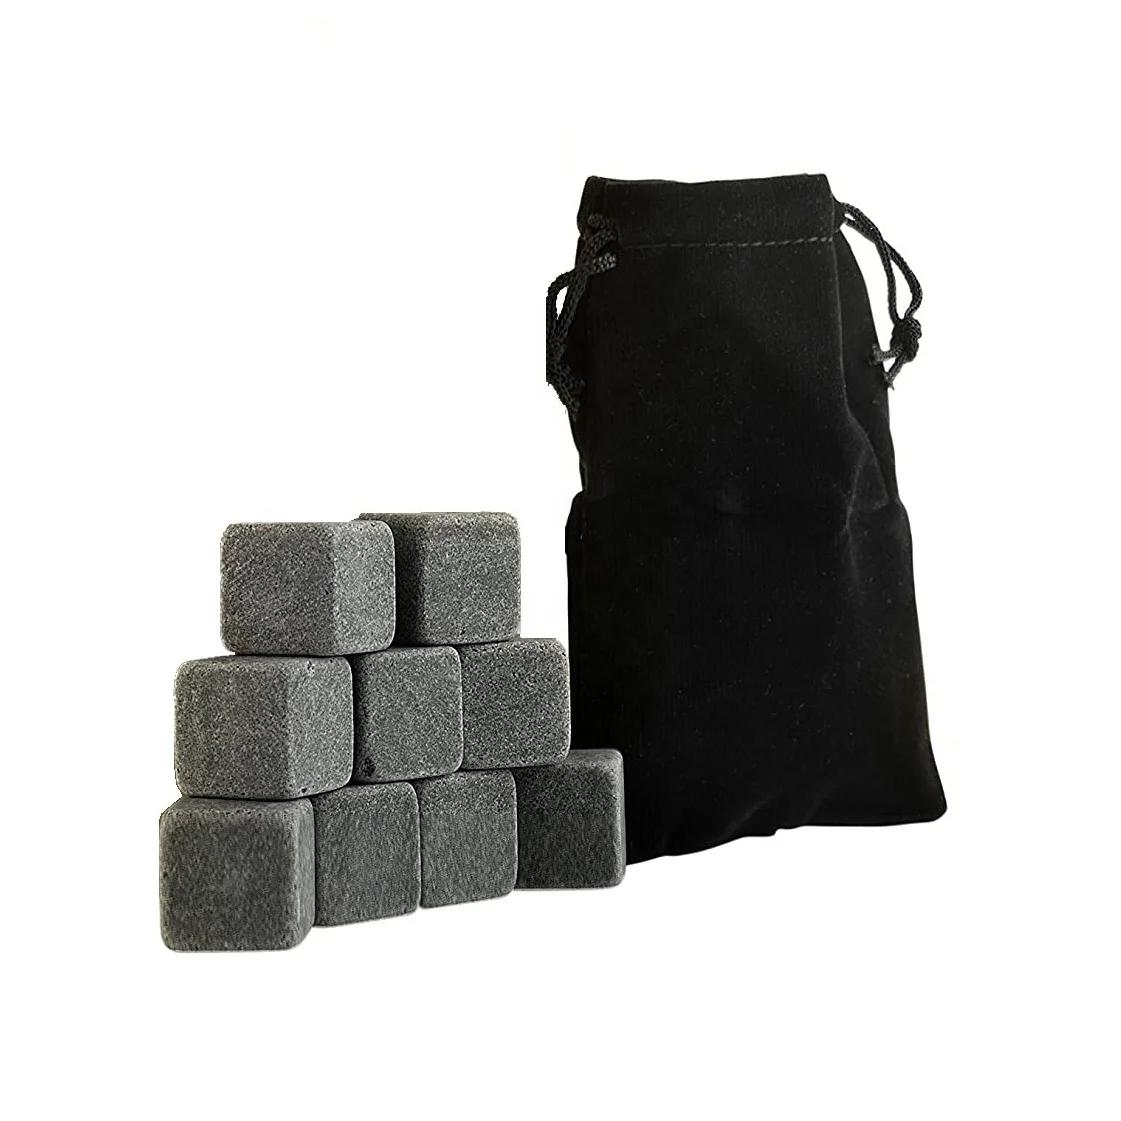 

Amazon Set of 9pcs Grey Granite Whiskey Stones Chilling Rocks Reusable Cooling Ice Cubes with Black Velvet Carrying Pouch, Dark gray